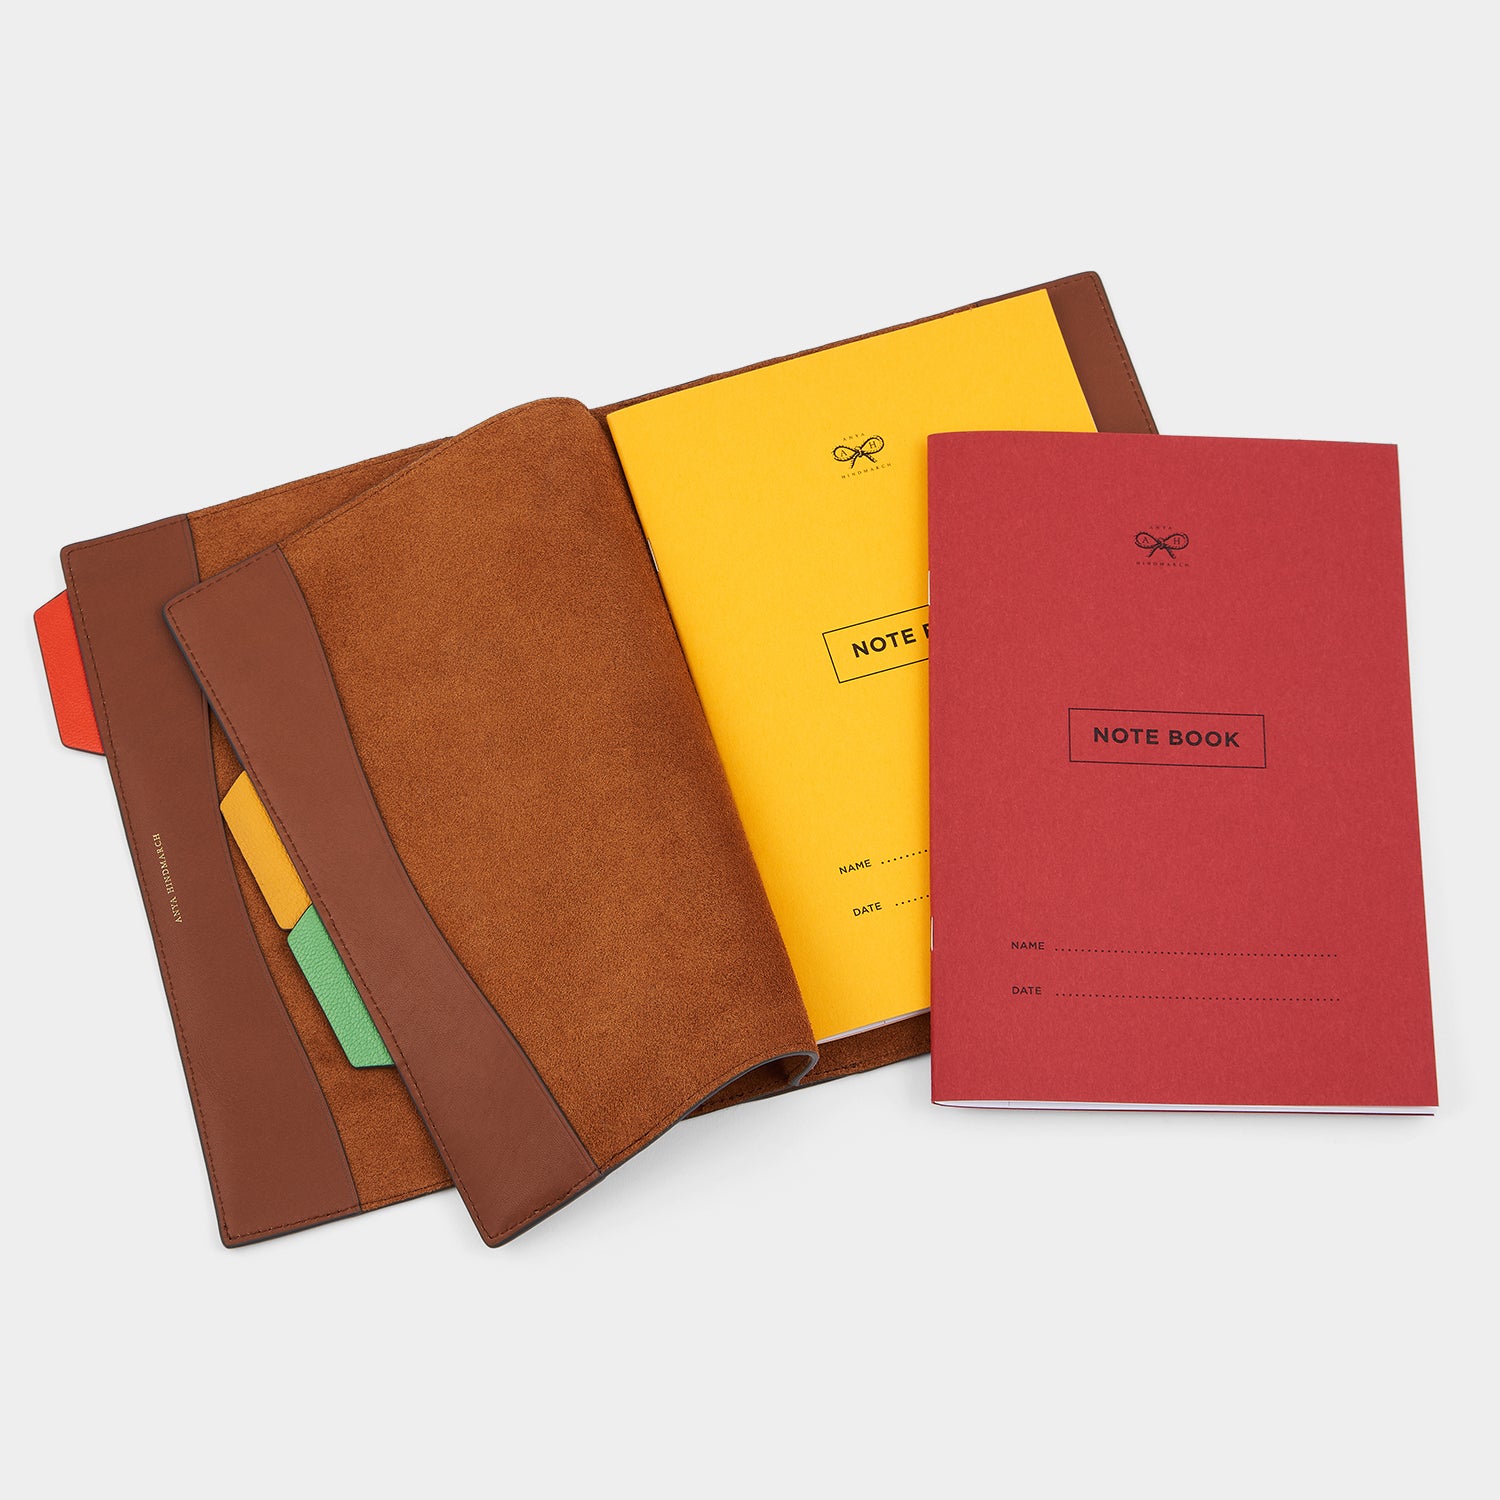 A5 Notebook Holder -

                  
                    Polished Leather in Tan -
                  

                  Anya Hindmarch UK
